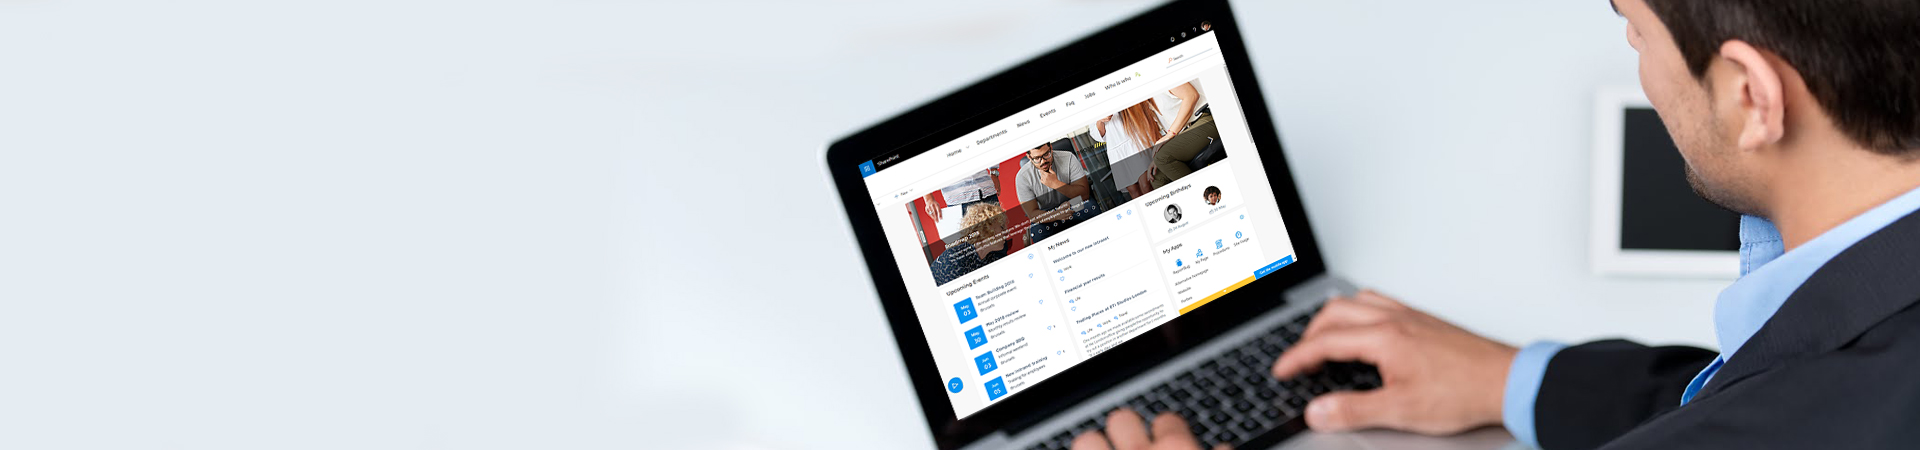 Customization of the SharePoint Intranet Product Developed by a European IT Company